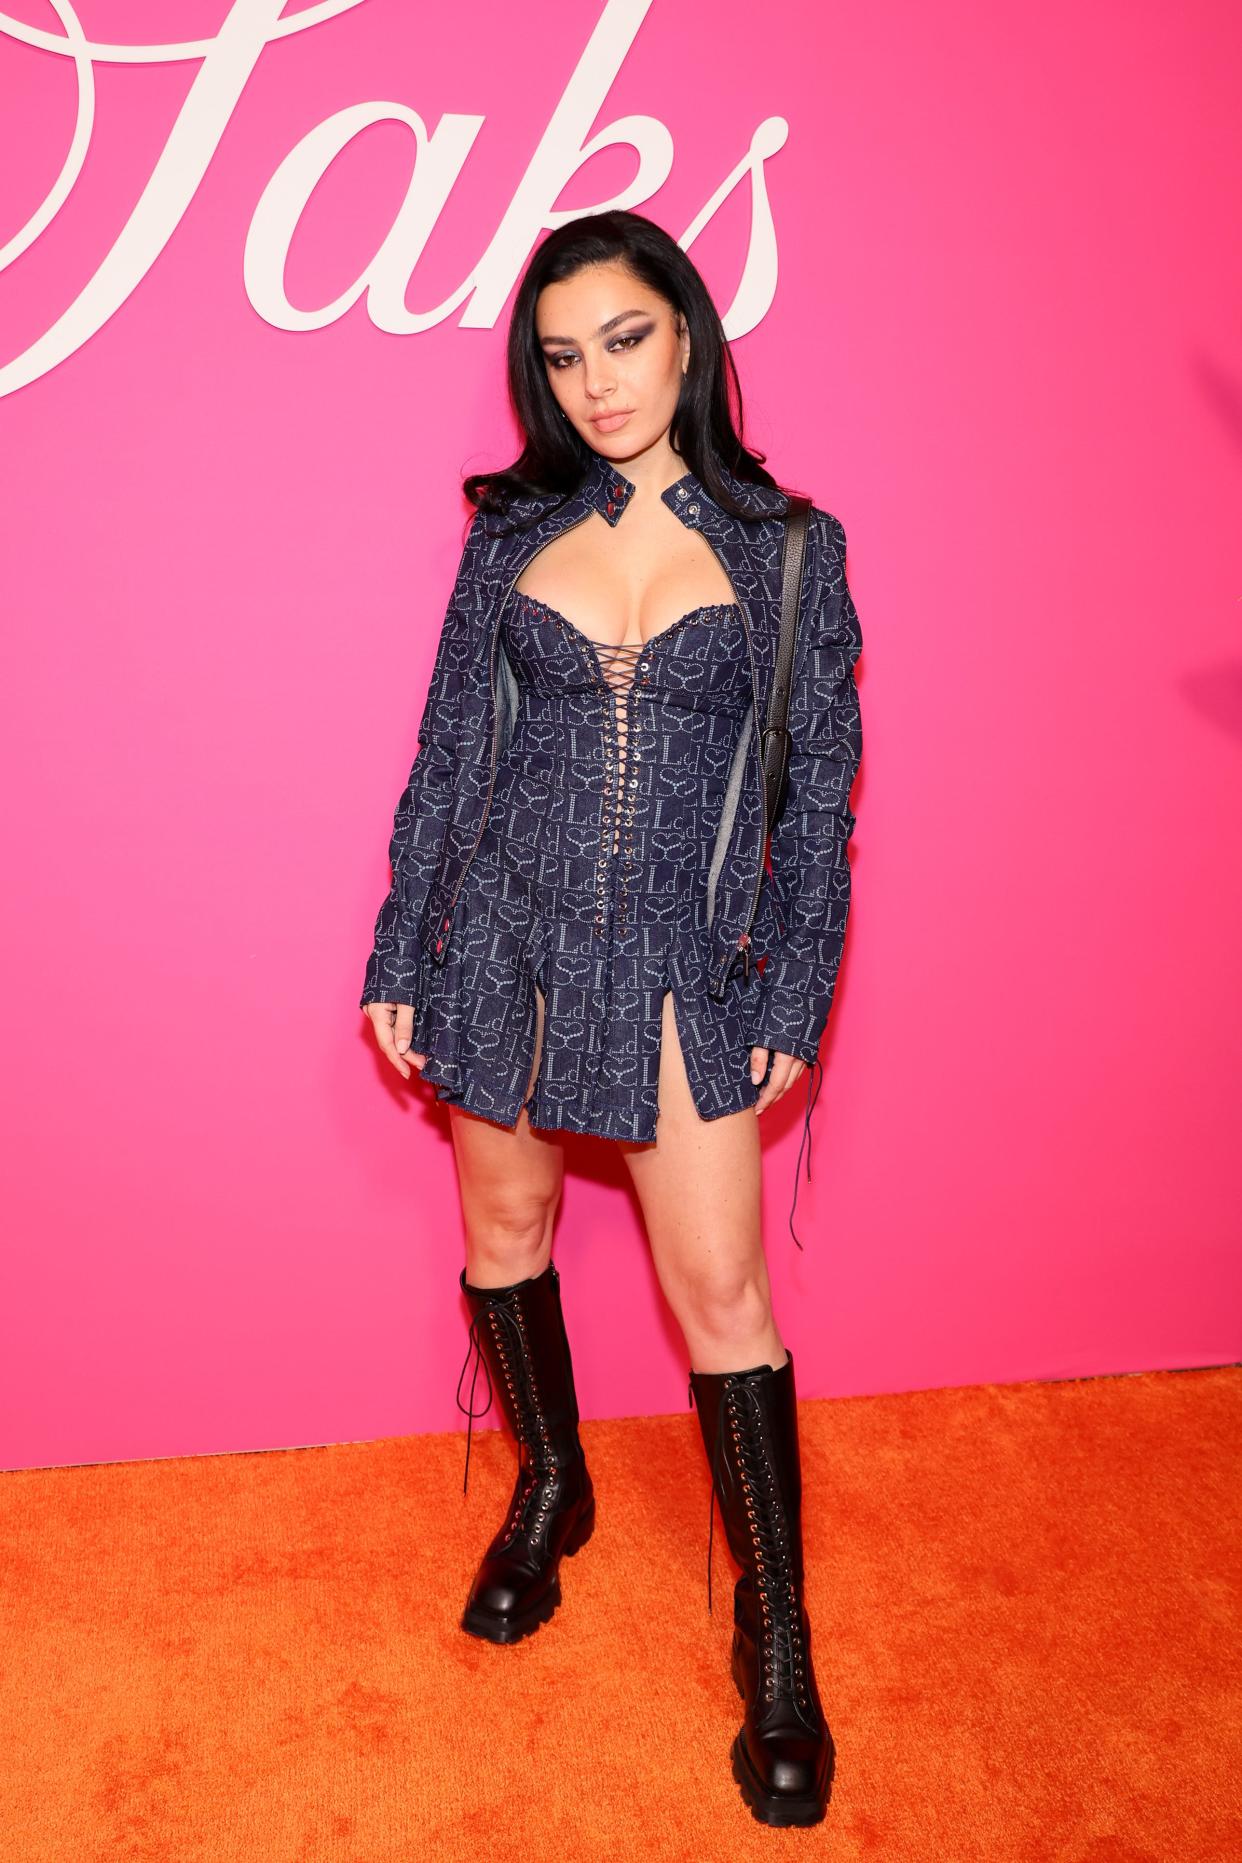 Charli XCX and drummer George Daniel are engaged, the singer revealed.